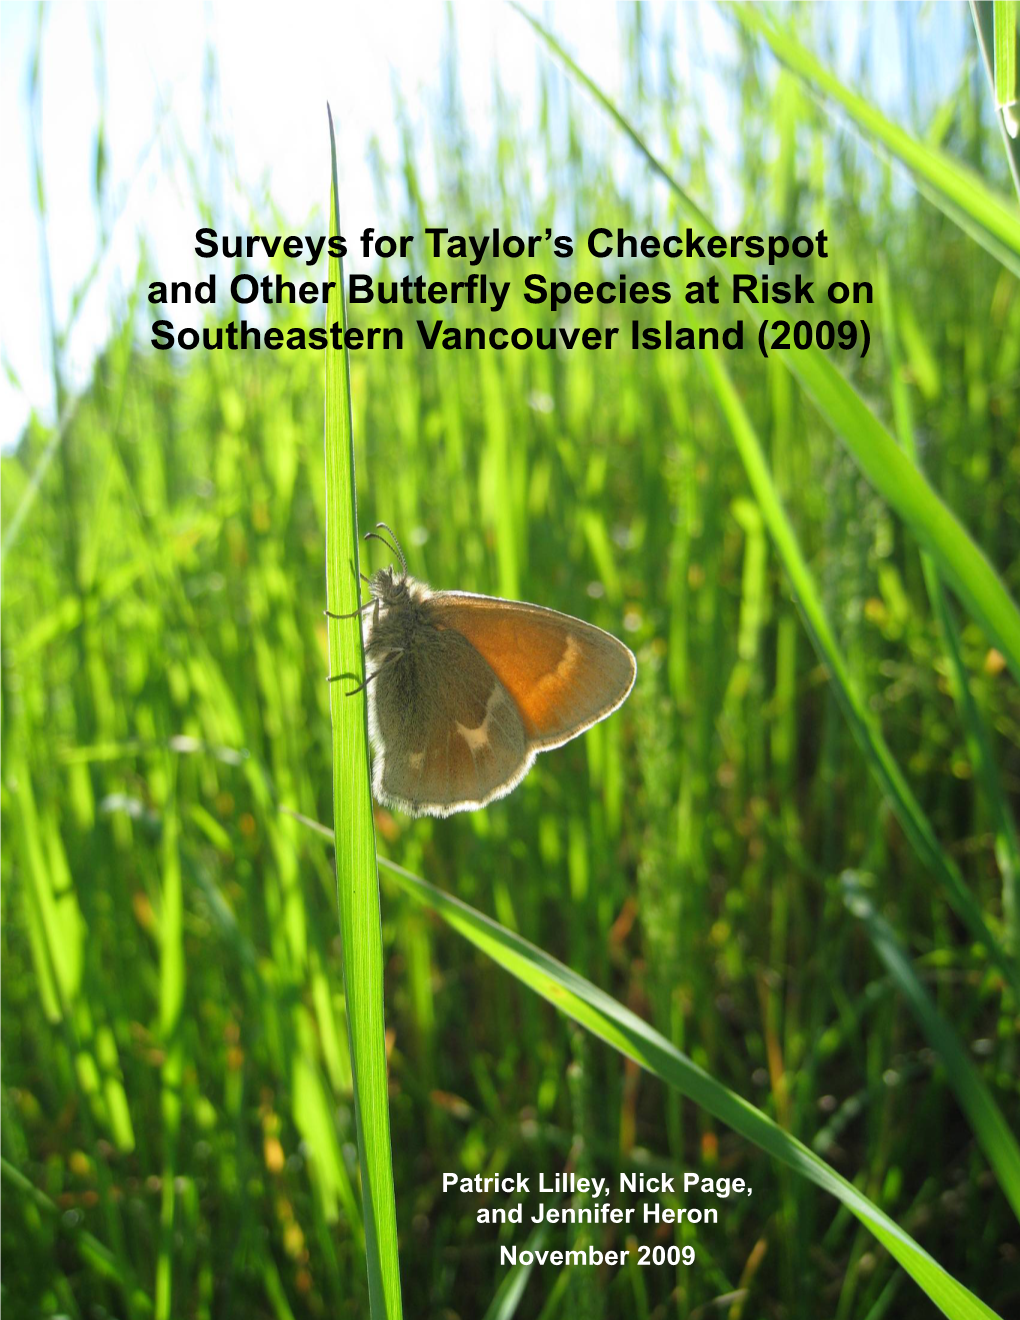 2009 Surveys for TCB and Other Butterfly SAR on Southeastern